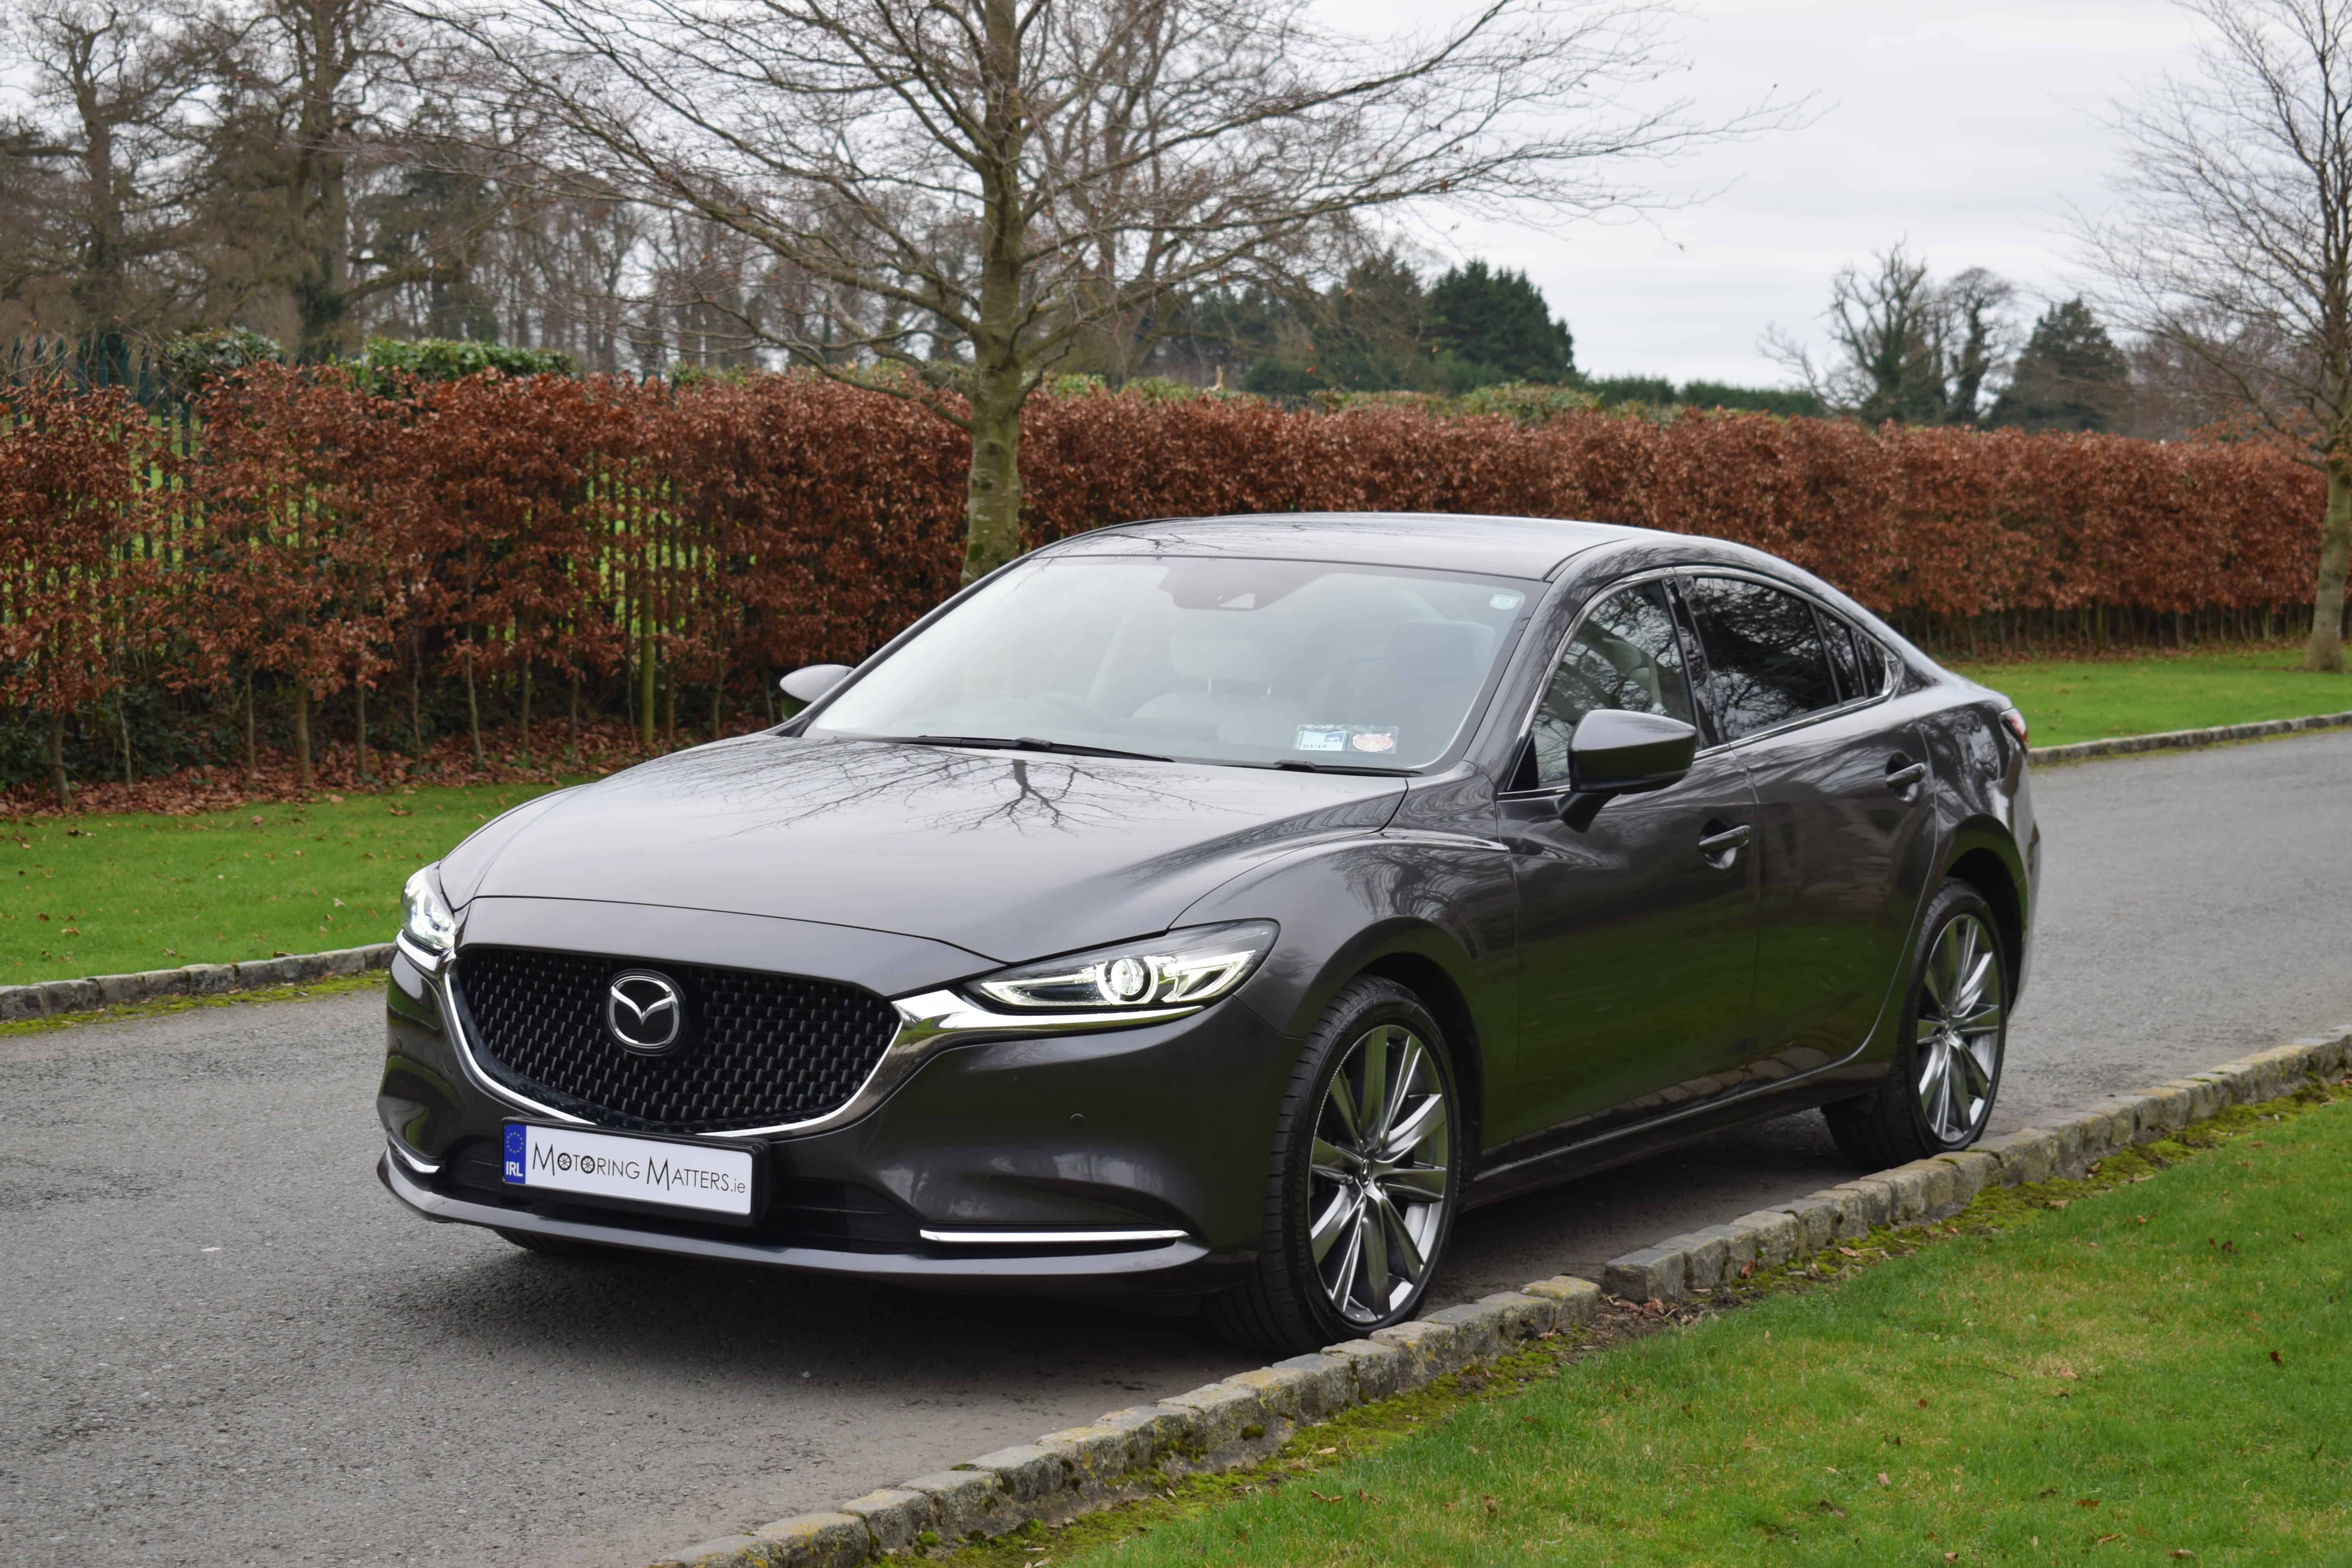 Stunning New Mazda 6 Saloon Redefining Expectations. Motoring Matters